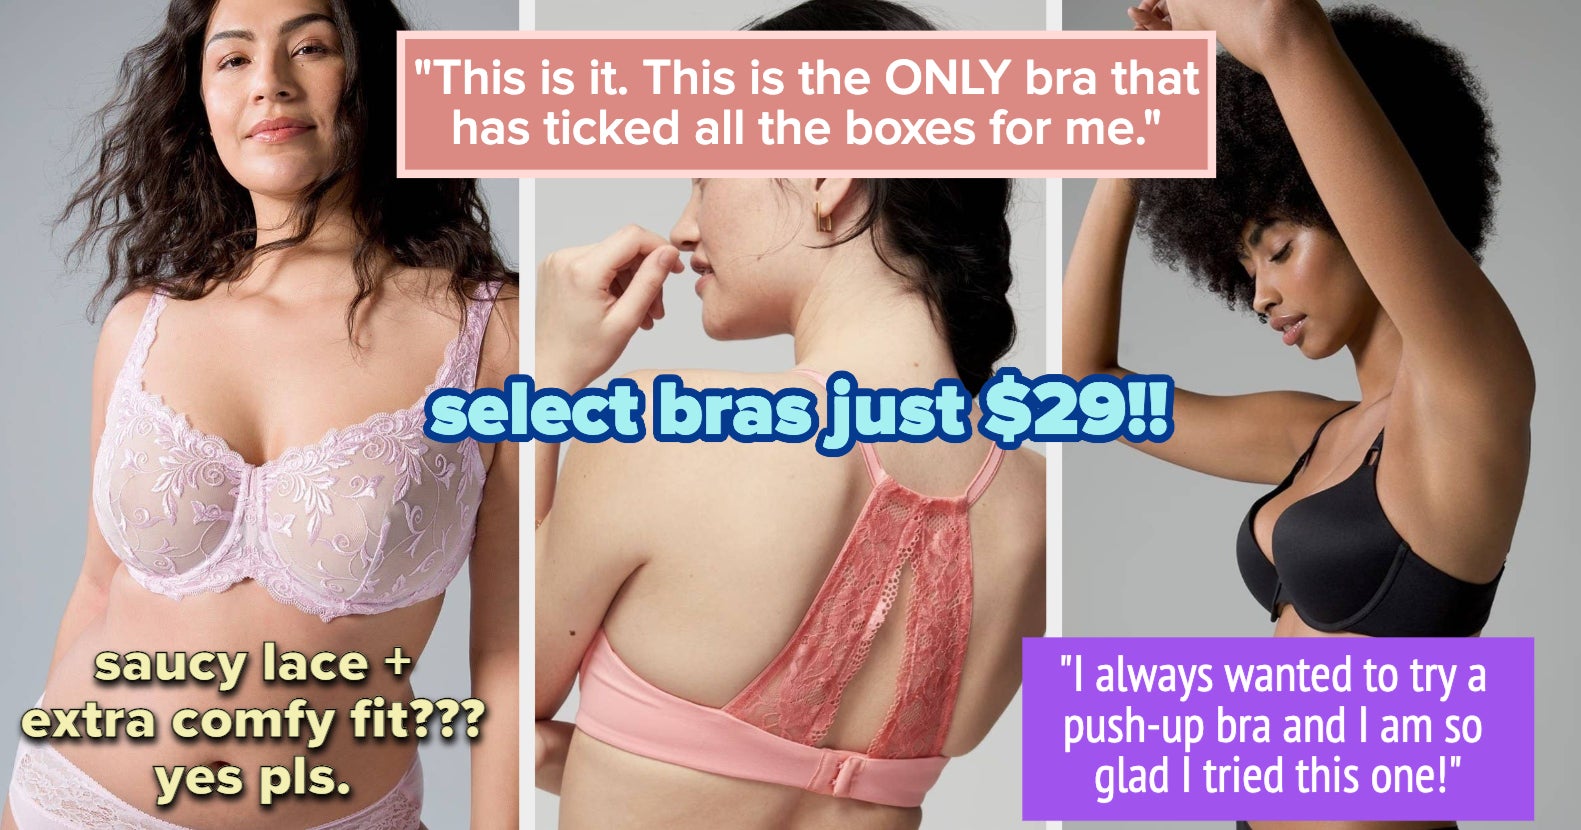 One Hot Bra Sale  This is one HOT bra sale! Hurry in to Soma Intimates for $29  bras - PLUS, one $5 panty with a bra purchase! This sale happens only